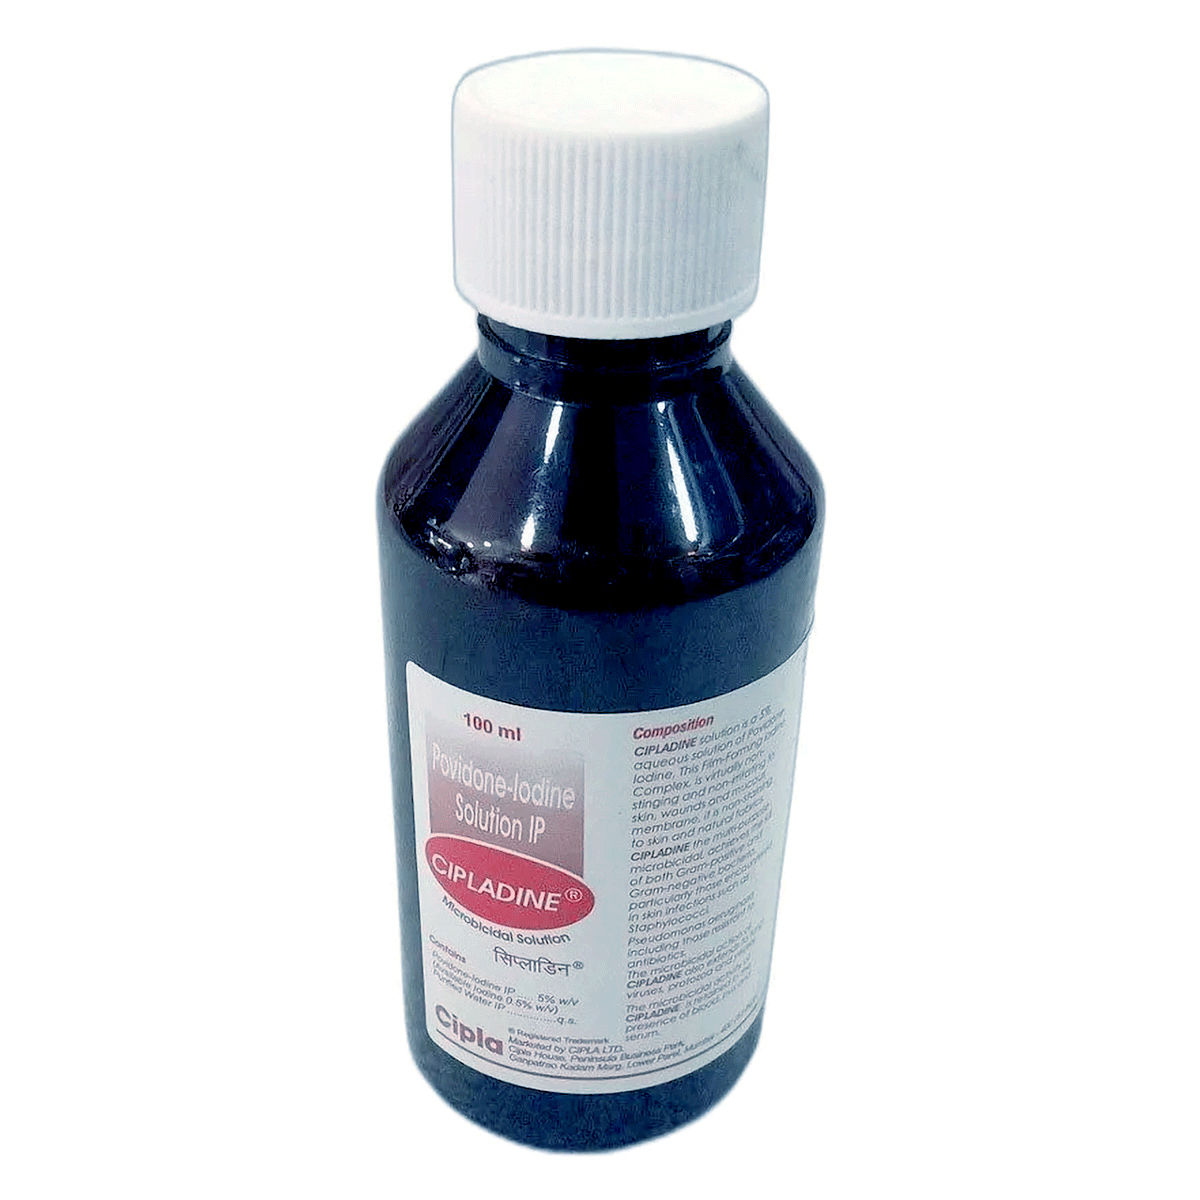 Betadine 7.5% Scrub 500 ml Price, Uses, Side Effects, Composition